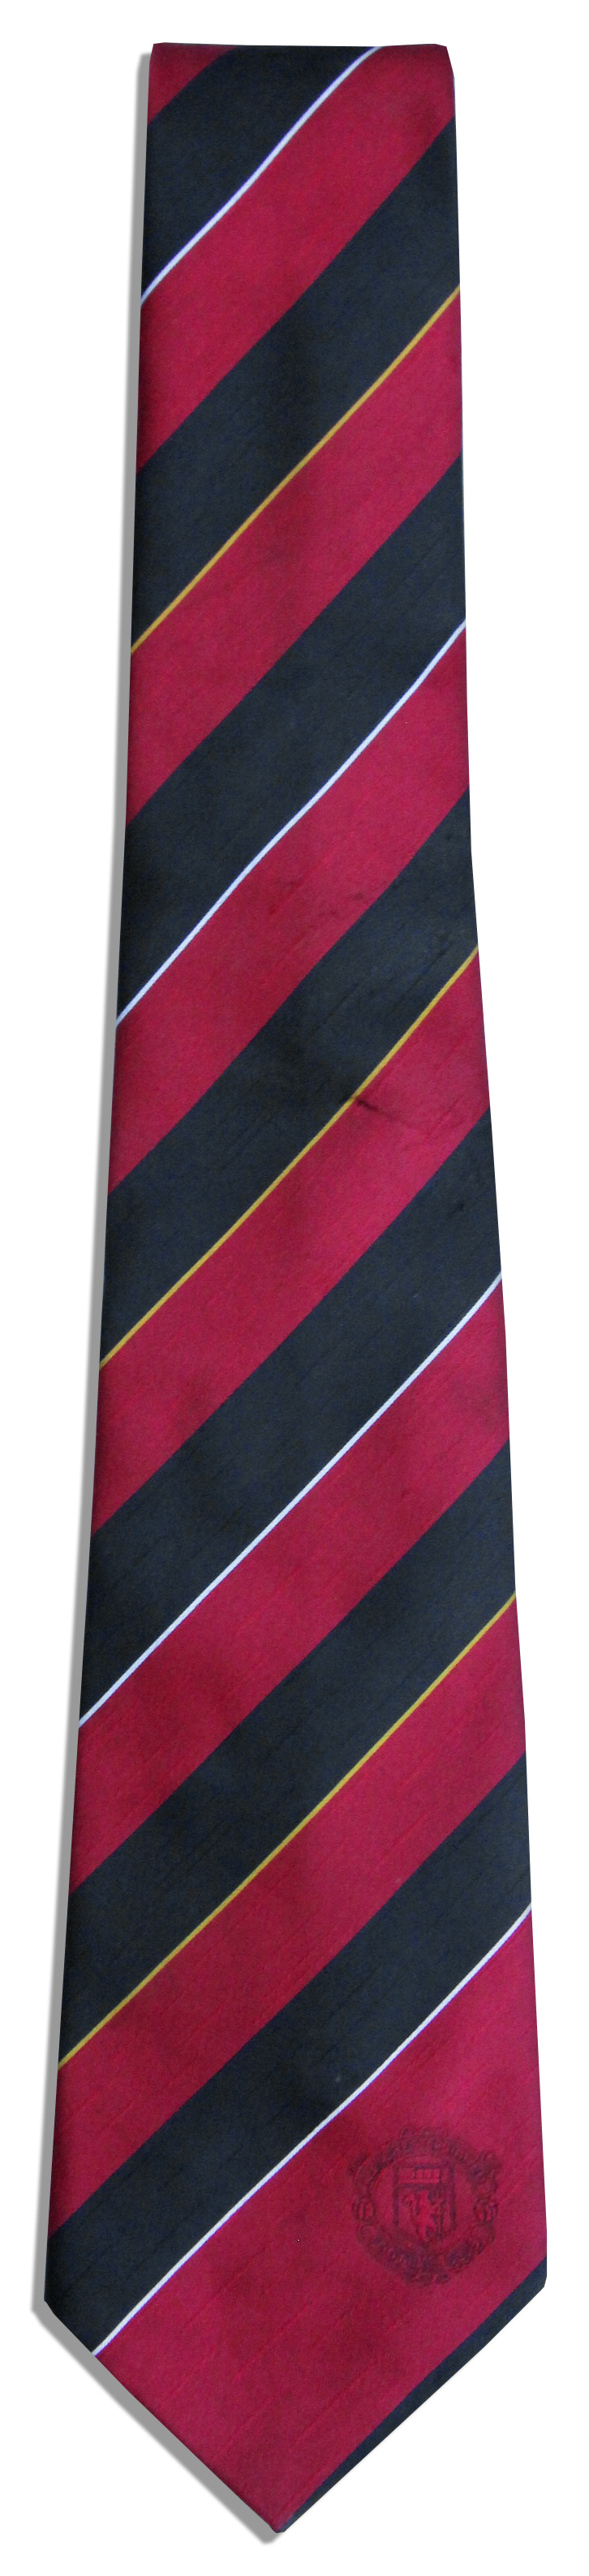 Lot Detail - Manchester United Logo Tie Worn by Paul Parker at the 1994